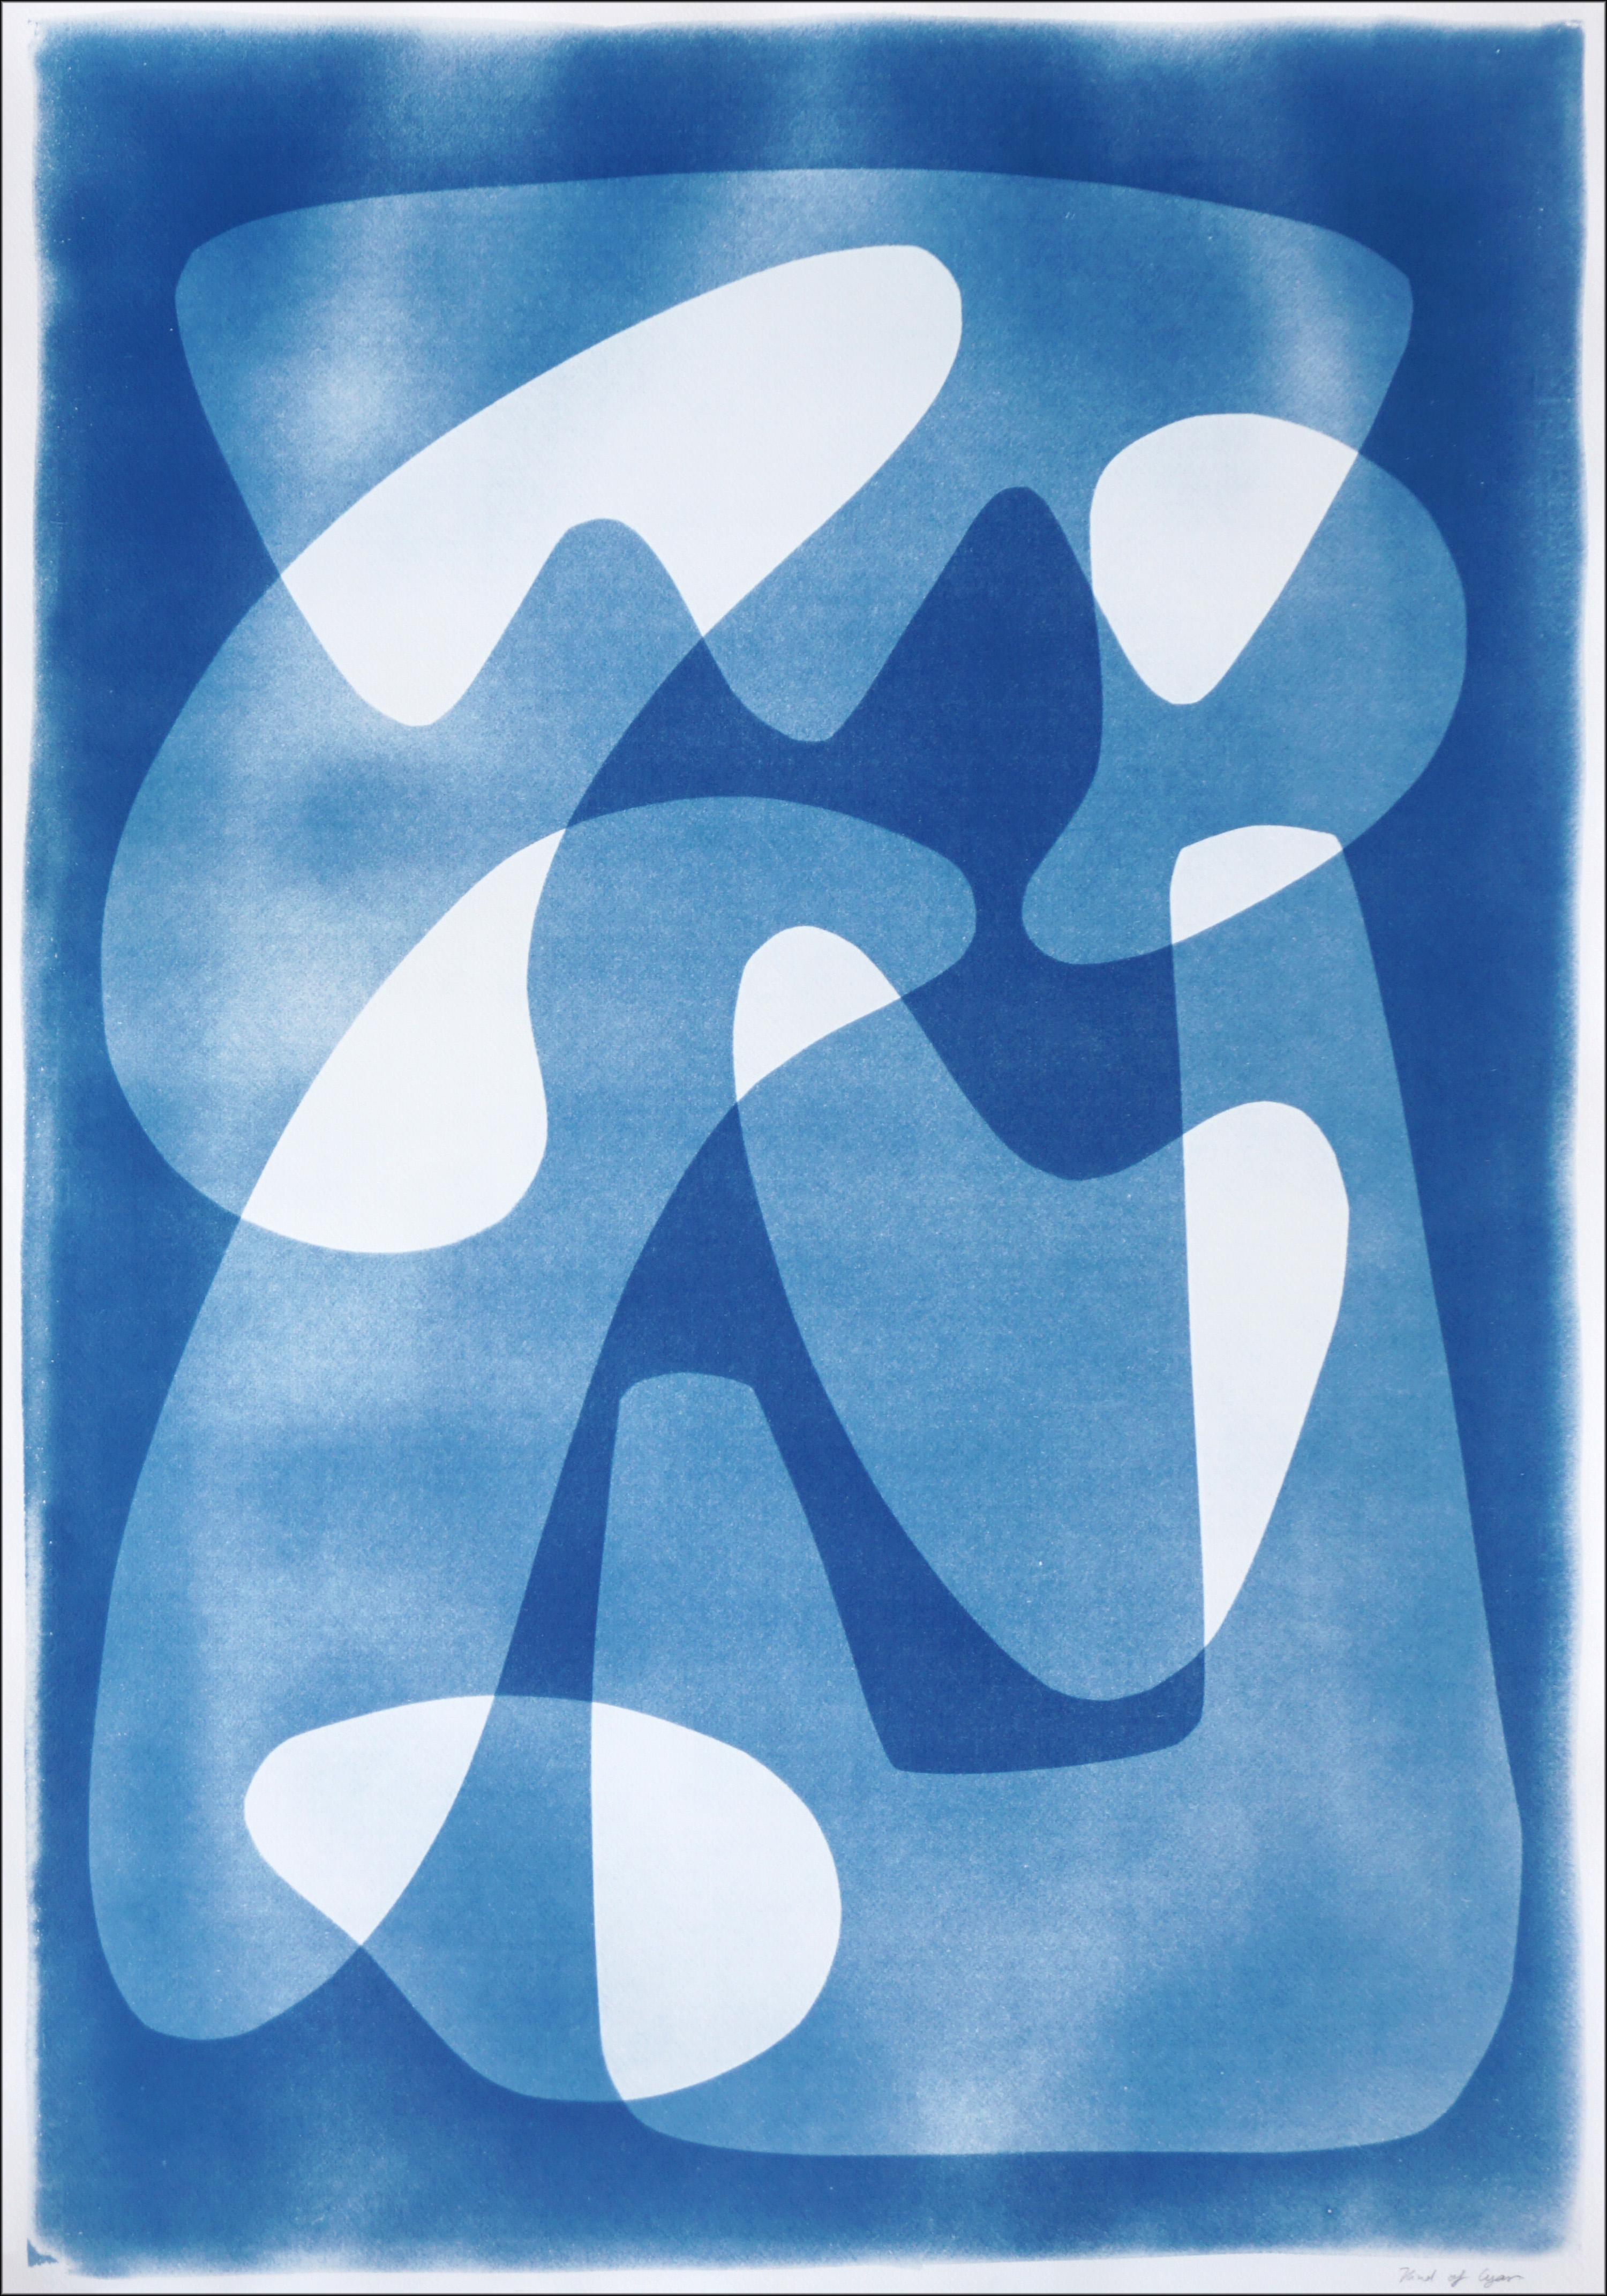 Kind of Cyan Abstract Print - White and Blue Pattern of Palettes, Modern Floating Shapes, Unique Cyanotype 